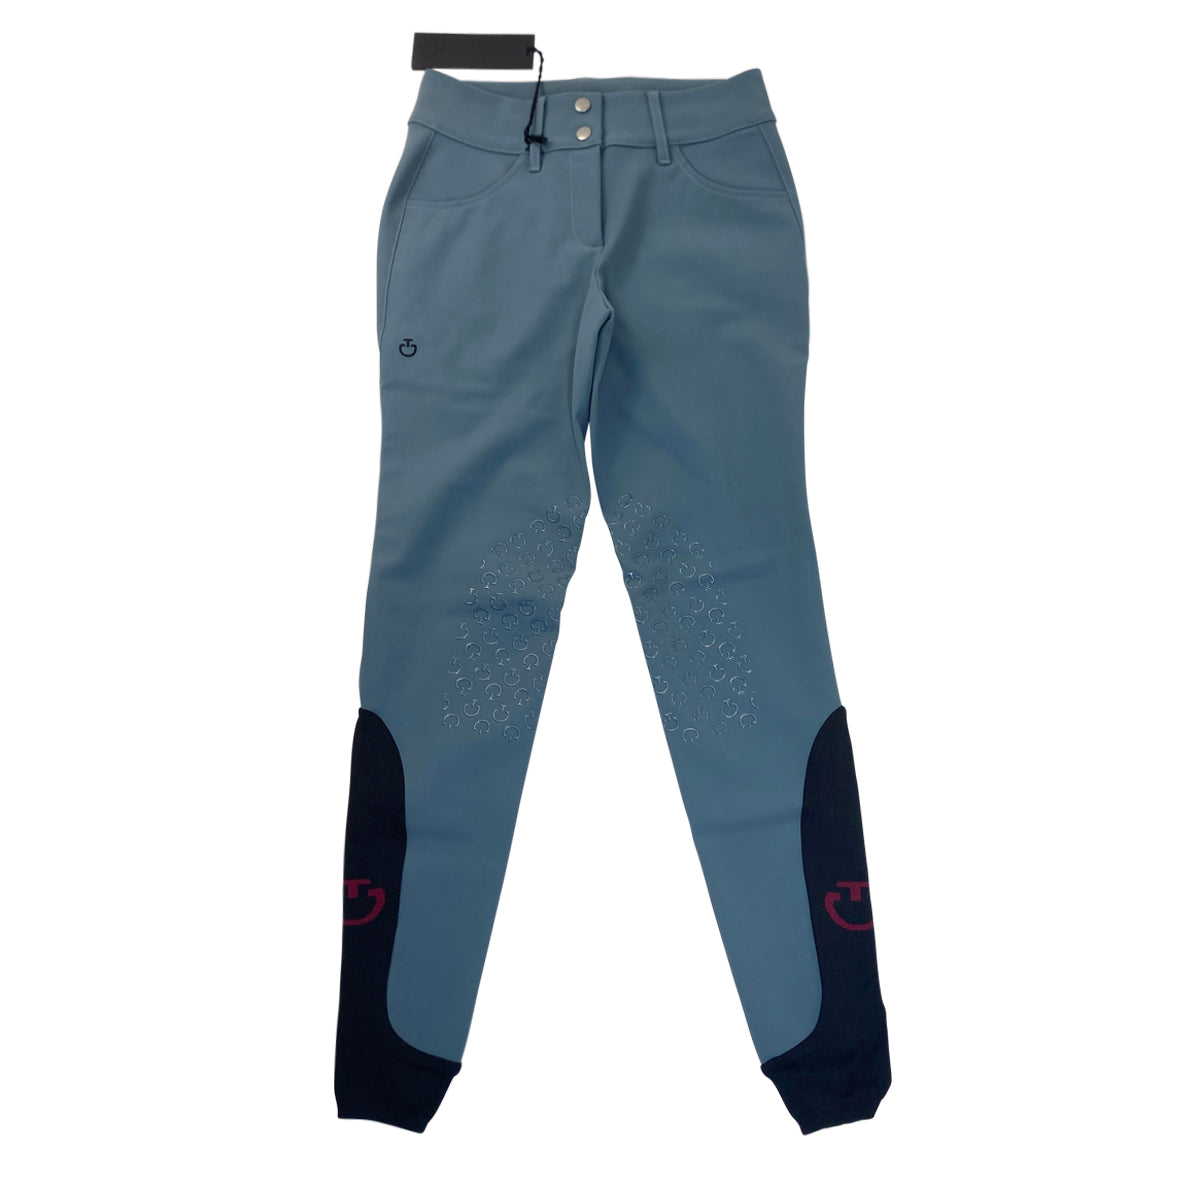 Cavalleria Toscana 'American' High Rise Jumping Breeches in Tidal